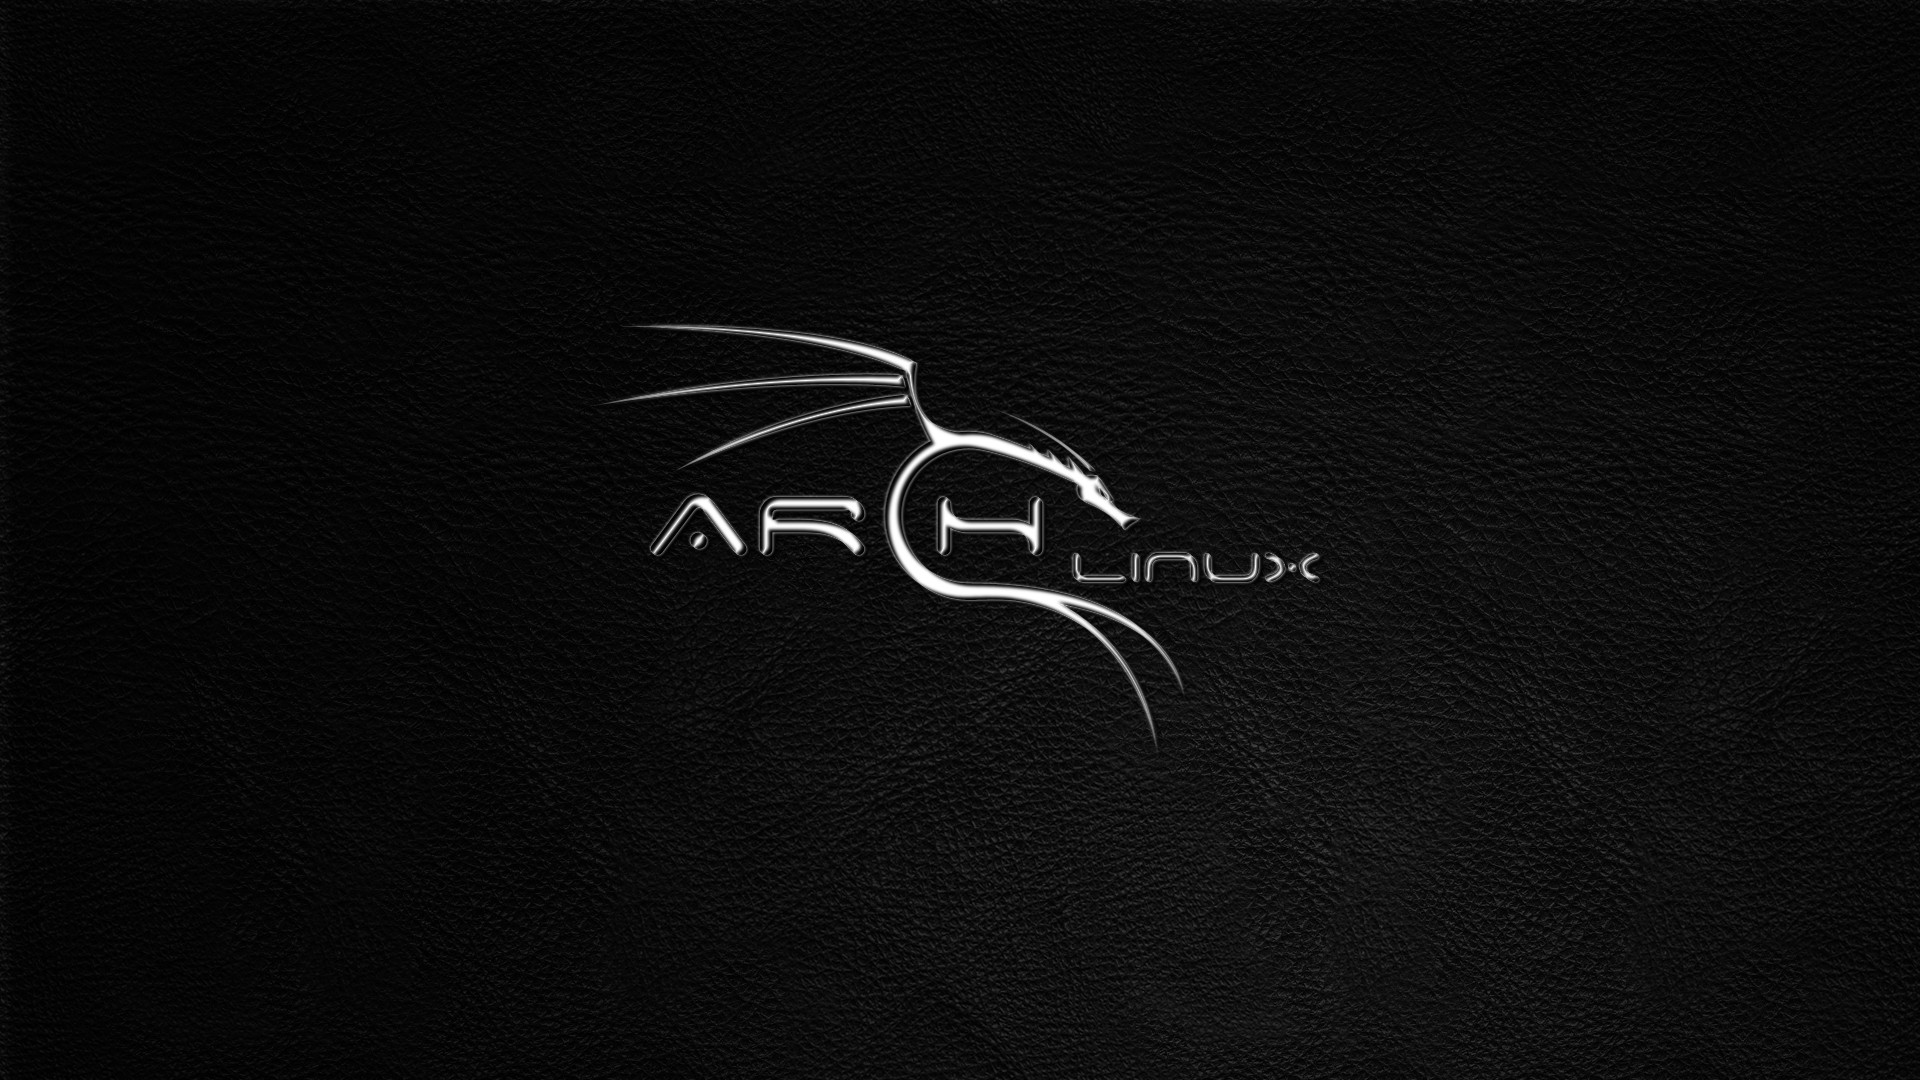 download arch linux